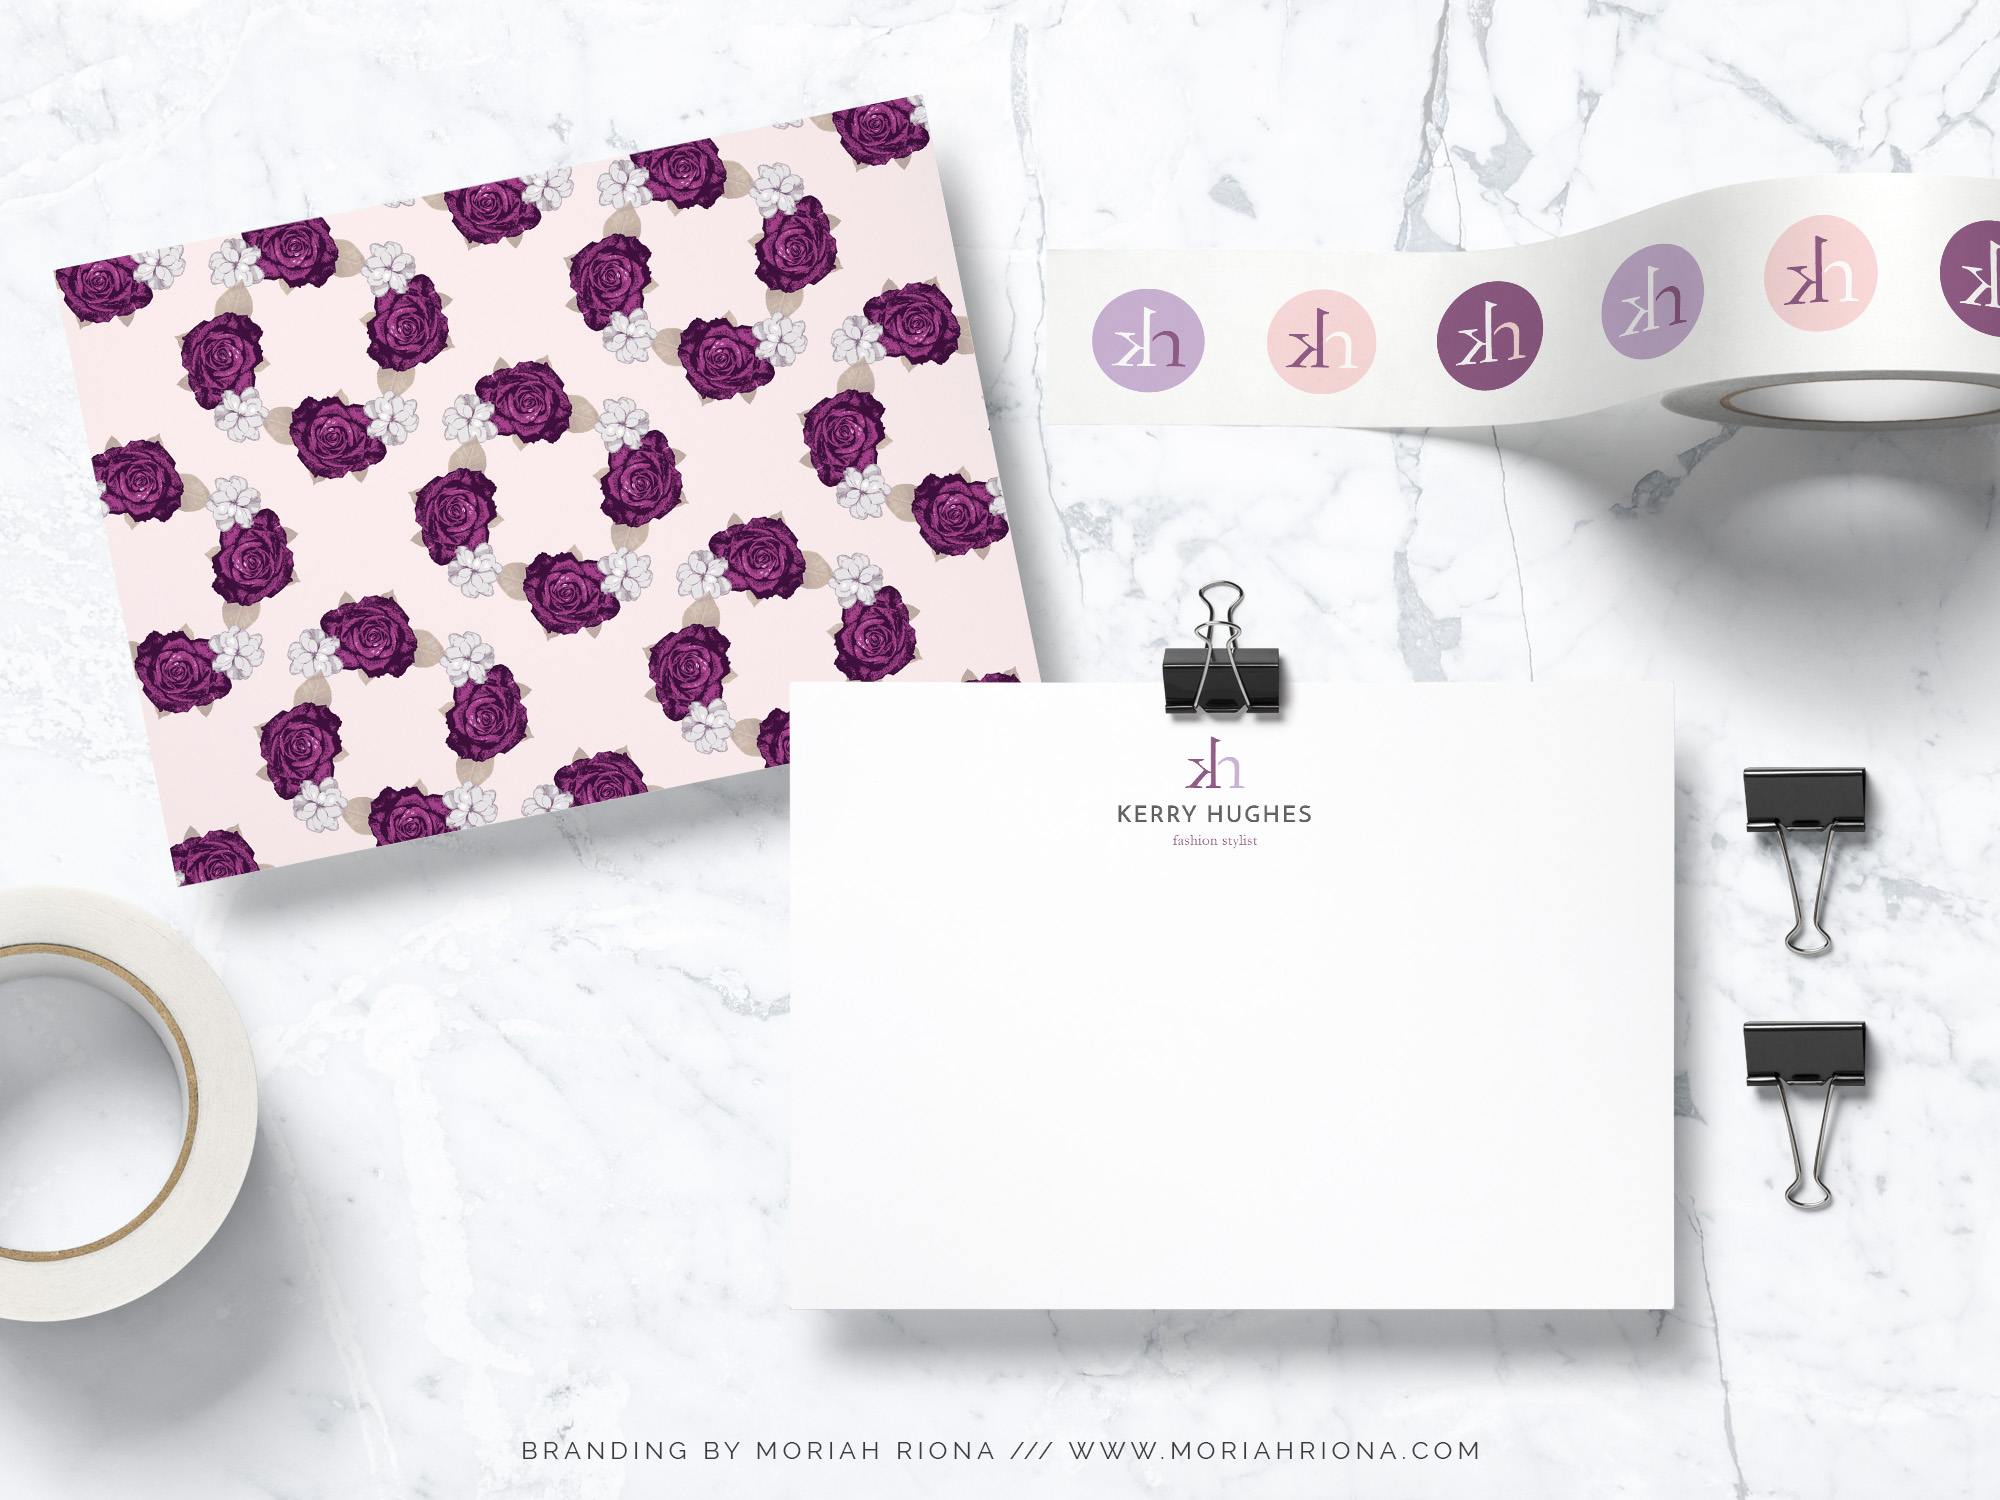 Custom stationery design from Branding Collection, designed by Moriah Riona for Fashion Stylist, Kerry Hughes. Blush, lavender and plum color palette for feminine branding. Graphic Design and Branding for photographers and creative bossladies.